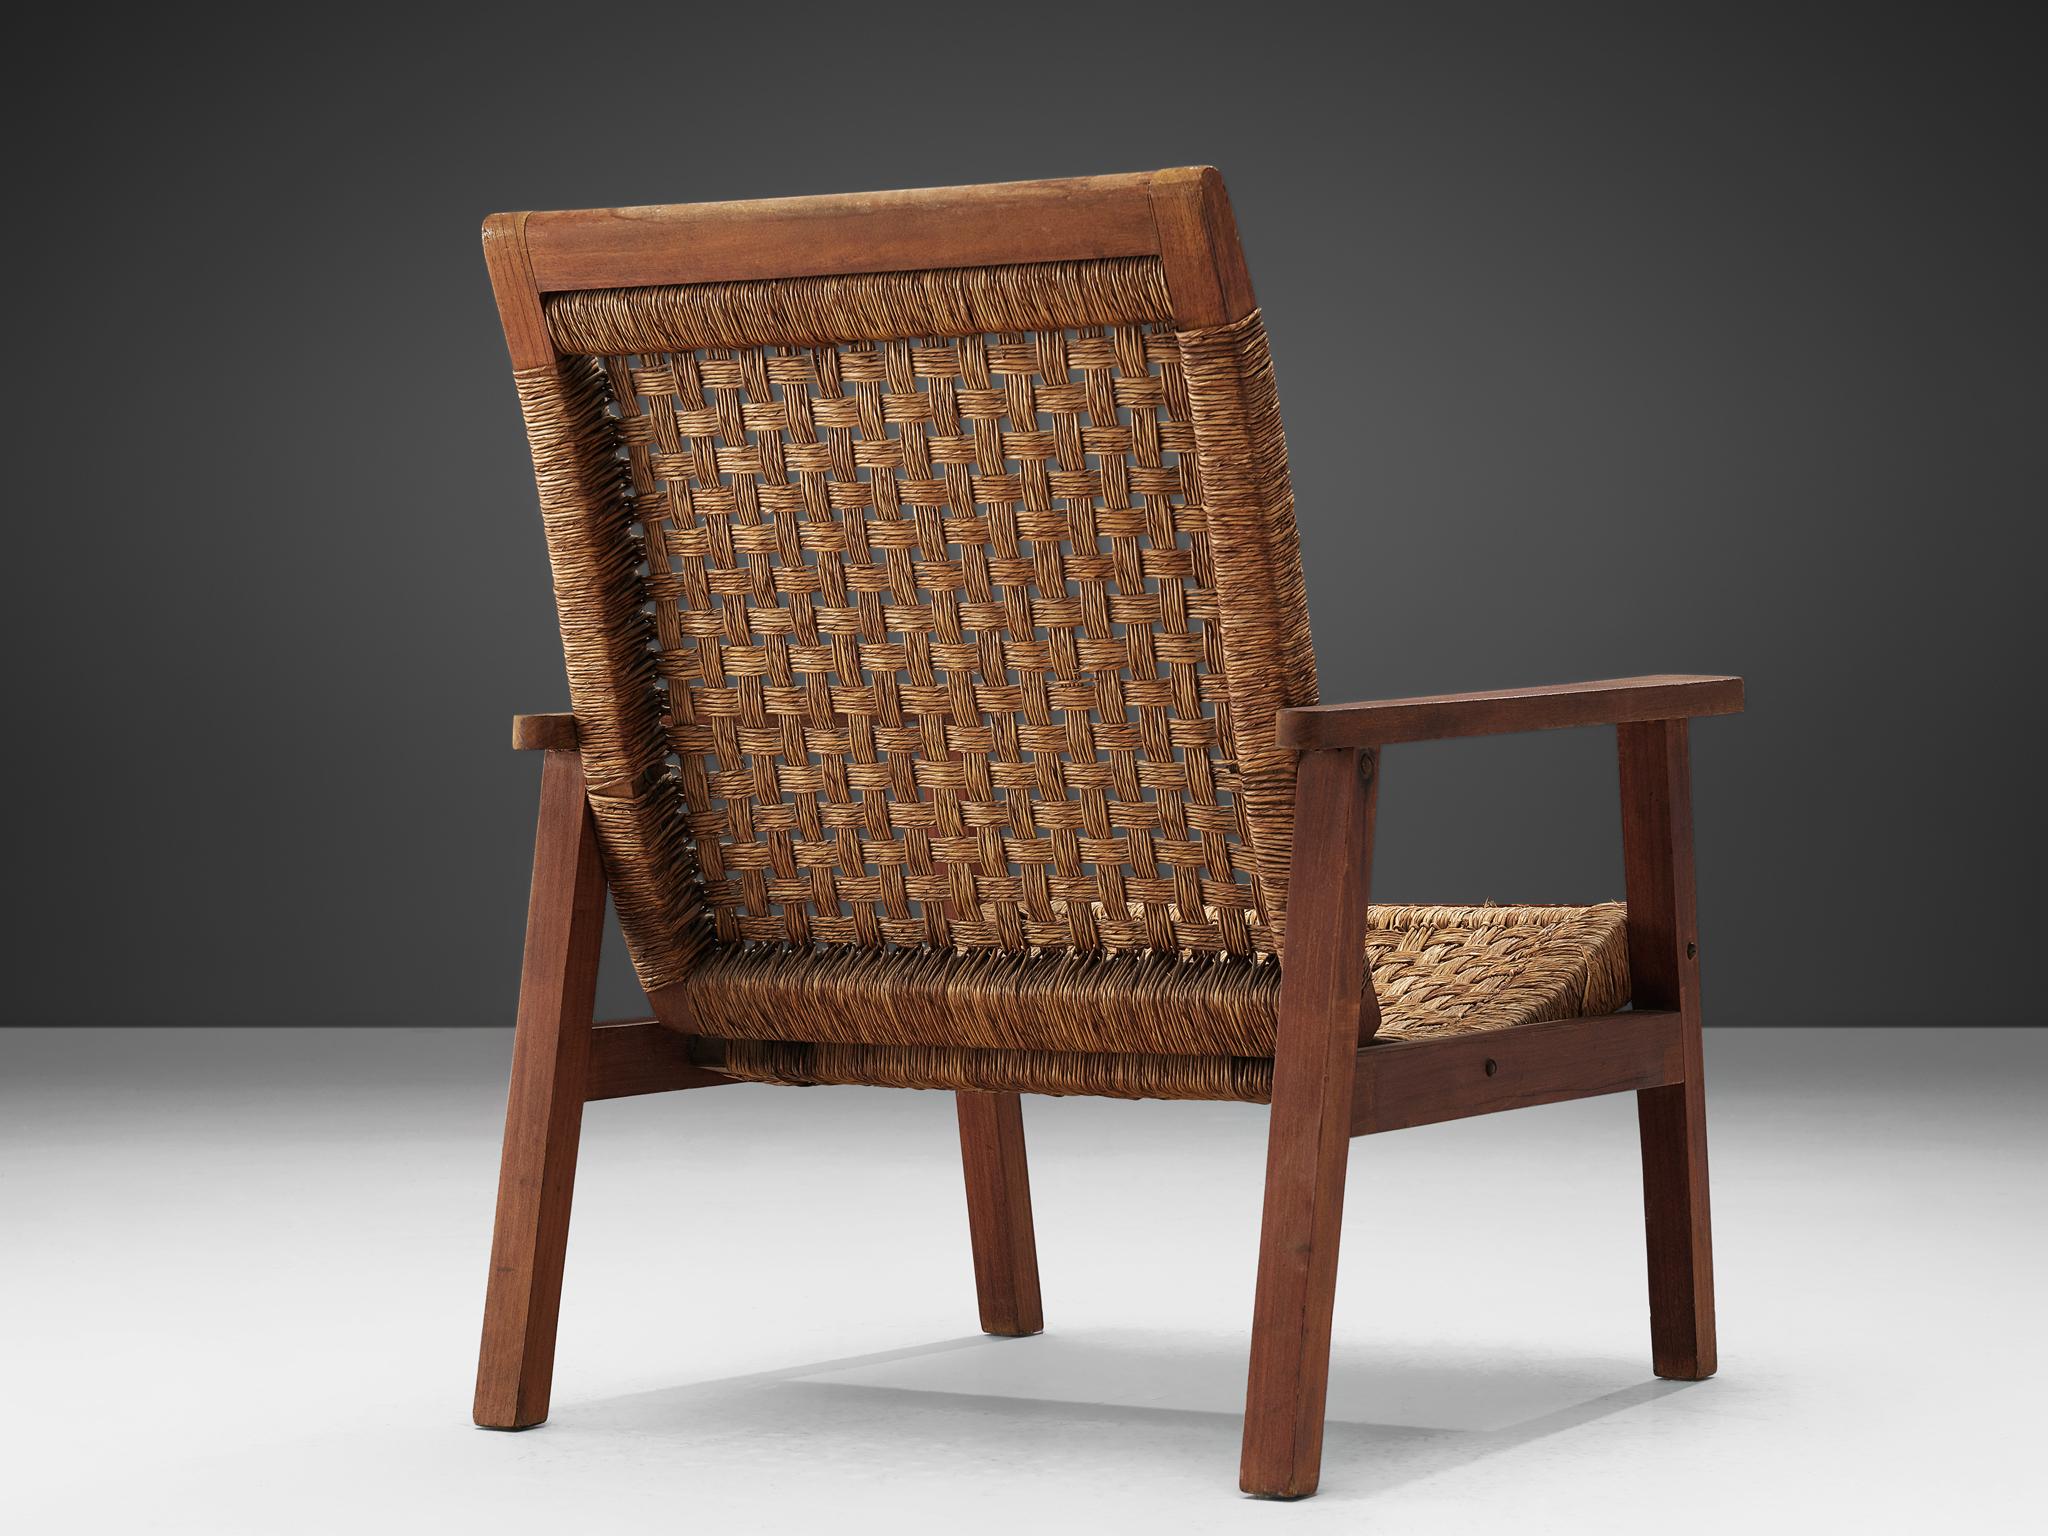 Armchair, stained wood and woven rope, Netherlands, 1940s.

This lounge chair is executed in wood and rope. The design of this chair is minimalistic in a puritan way. The woven seat and backrest are simplistic, but give the sitter a comfortable